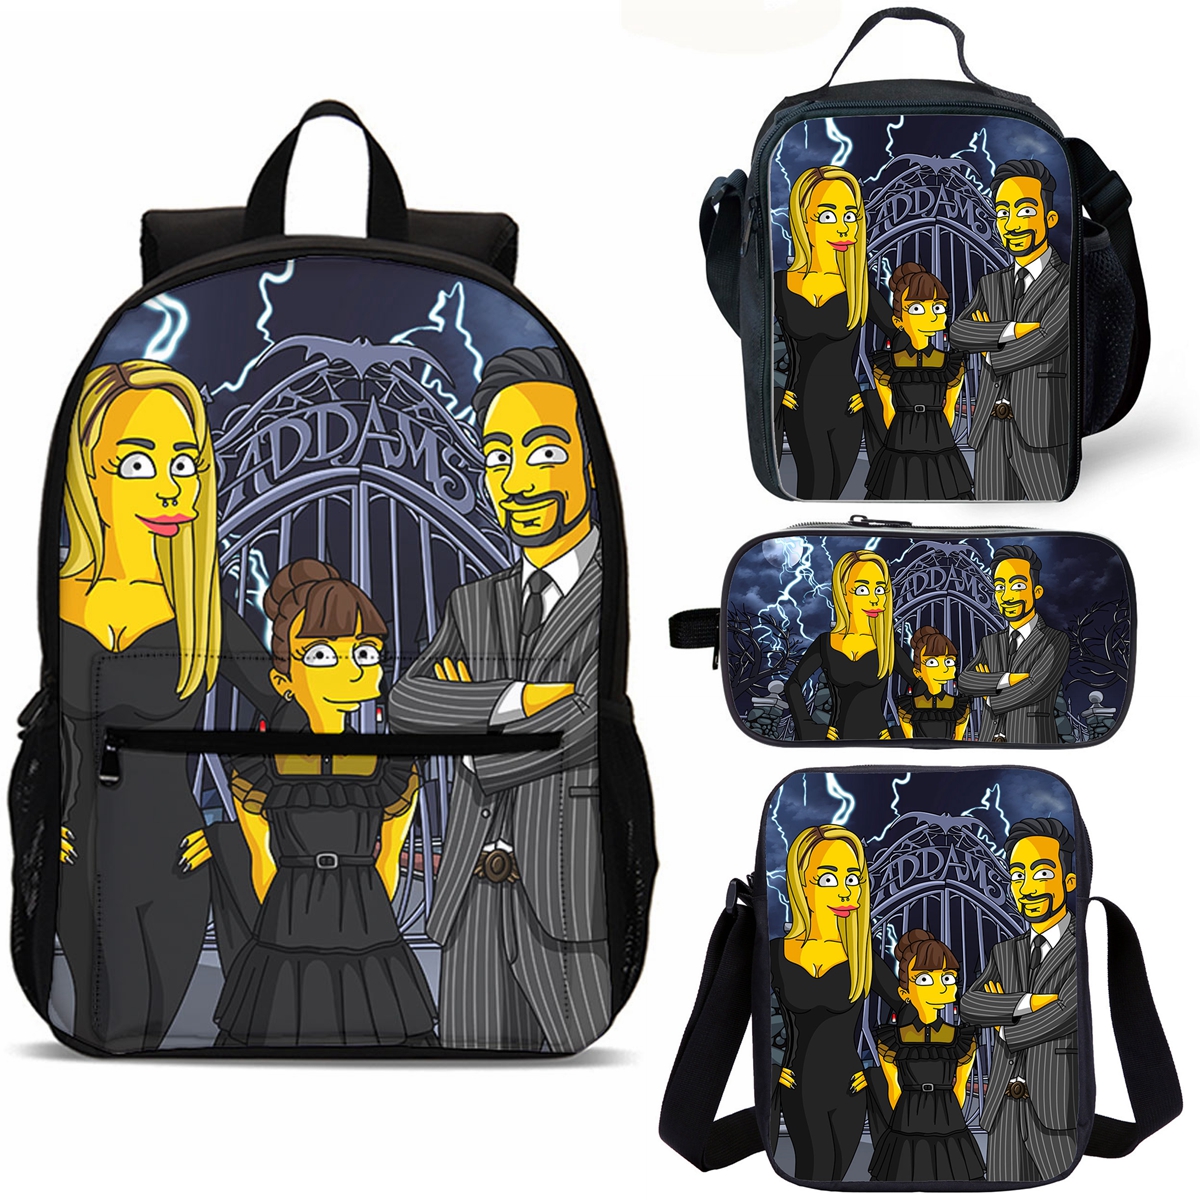 Simpsons Style Addams Family Wednesday School Merch 18" School Backpack Lunch Bag Shoulder Bag Pencil Case